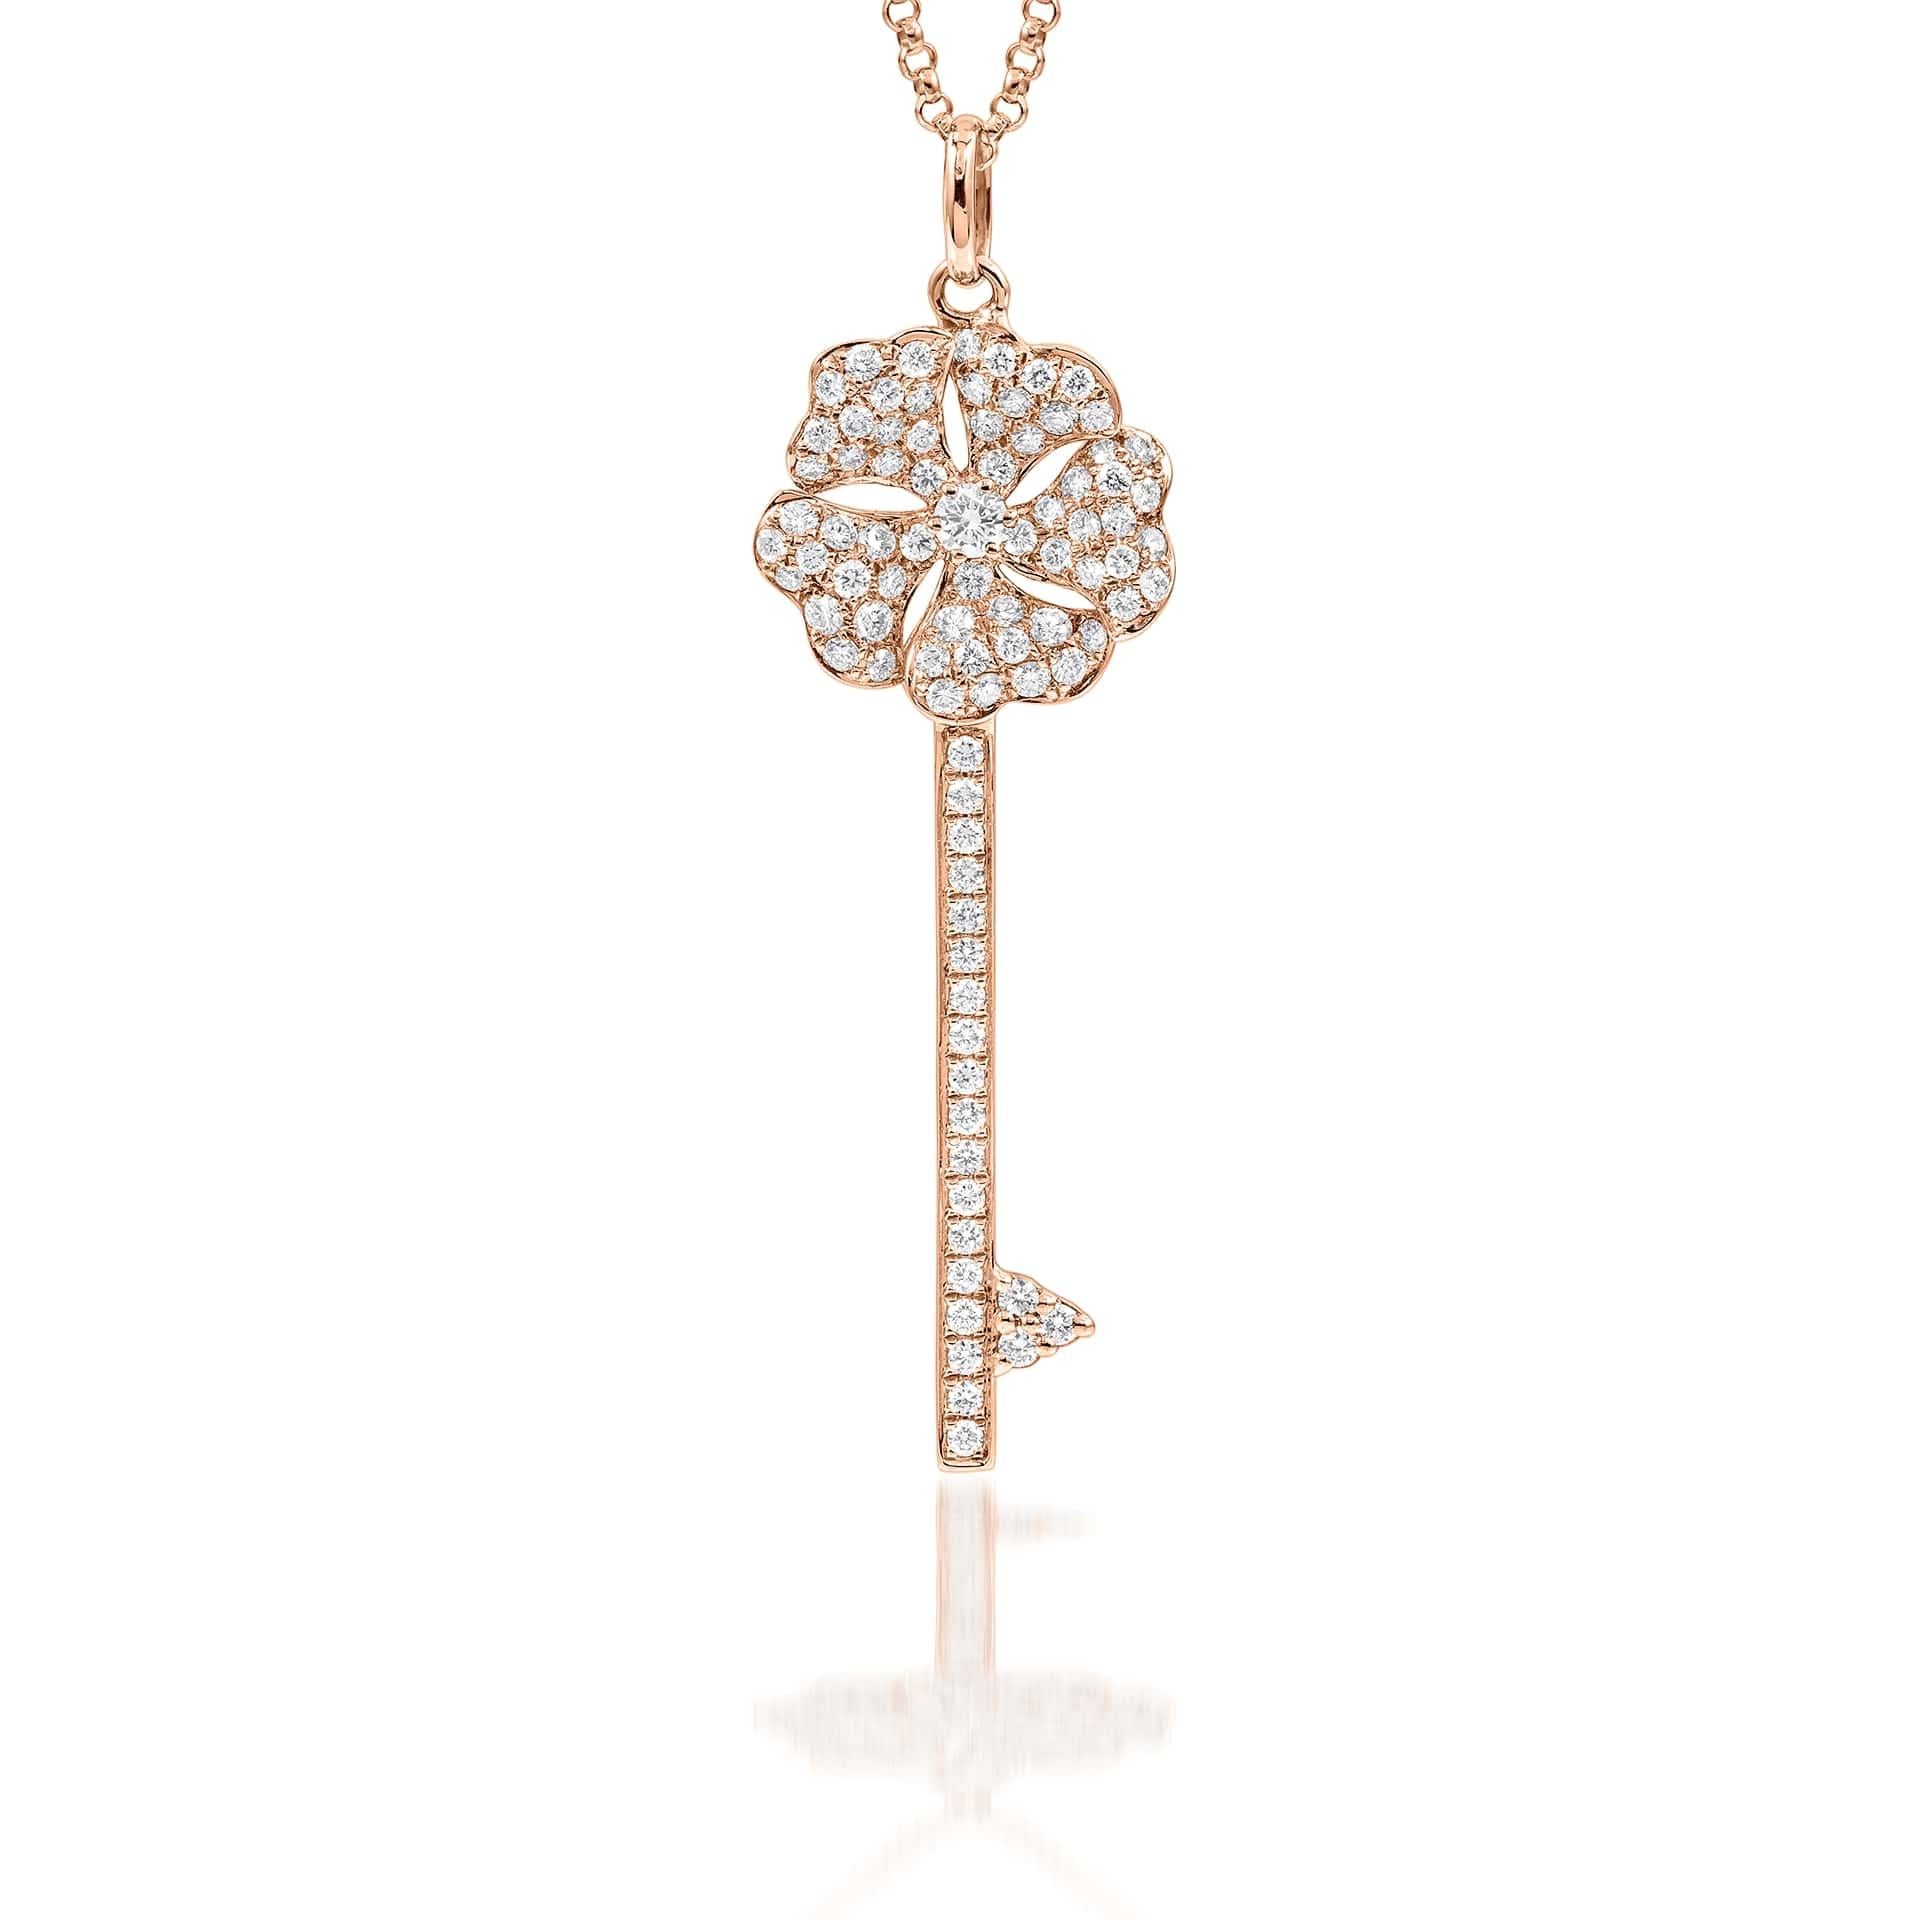 Bloom Diamond Key Necklace in 18K Rose Gold

Inspired by the exquisite petals of the alpine cinquefoil flower, the Bloom collection combines the richness of diamonds and precious metals with the light versatility of this delicate, five-pointed